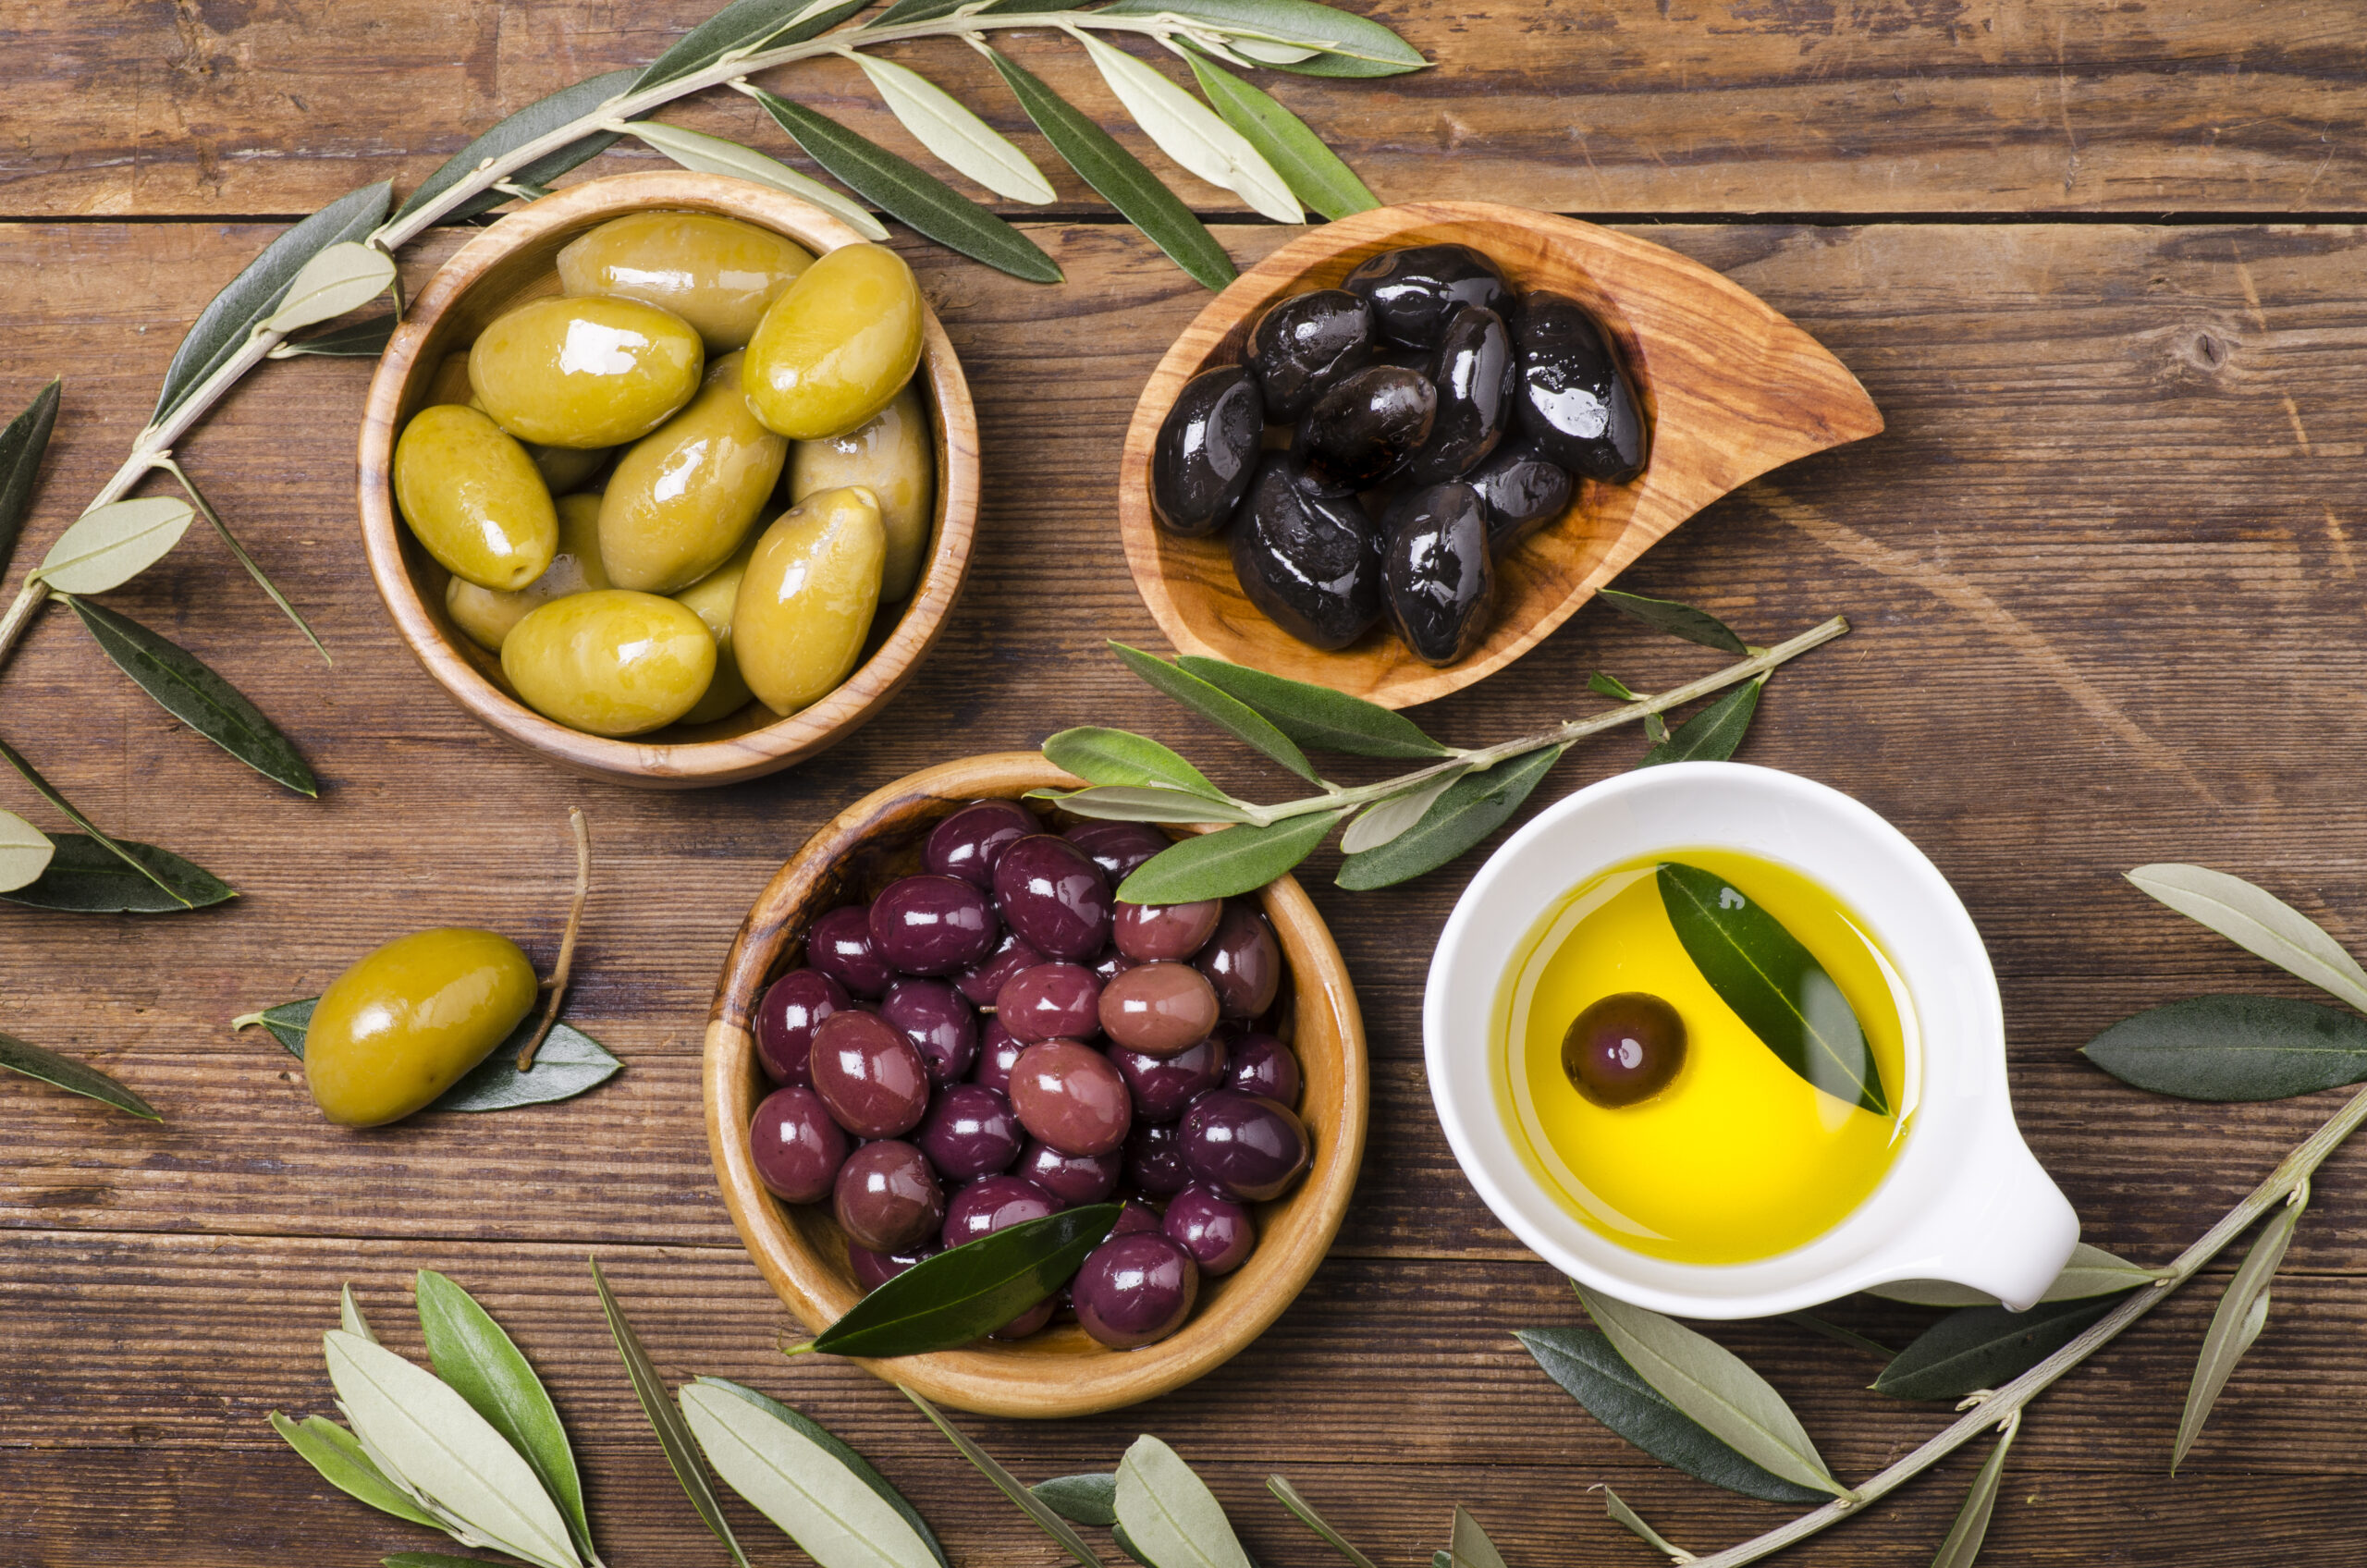 olive oil prevents osteoporosis